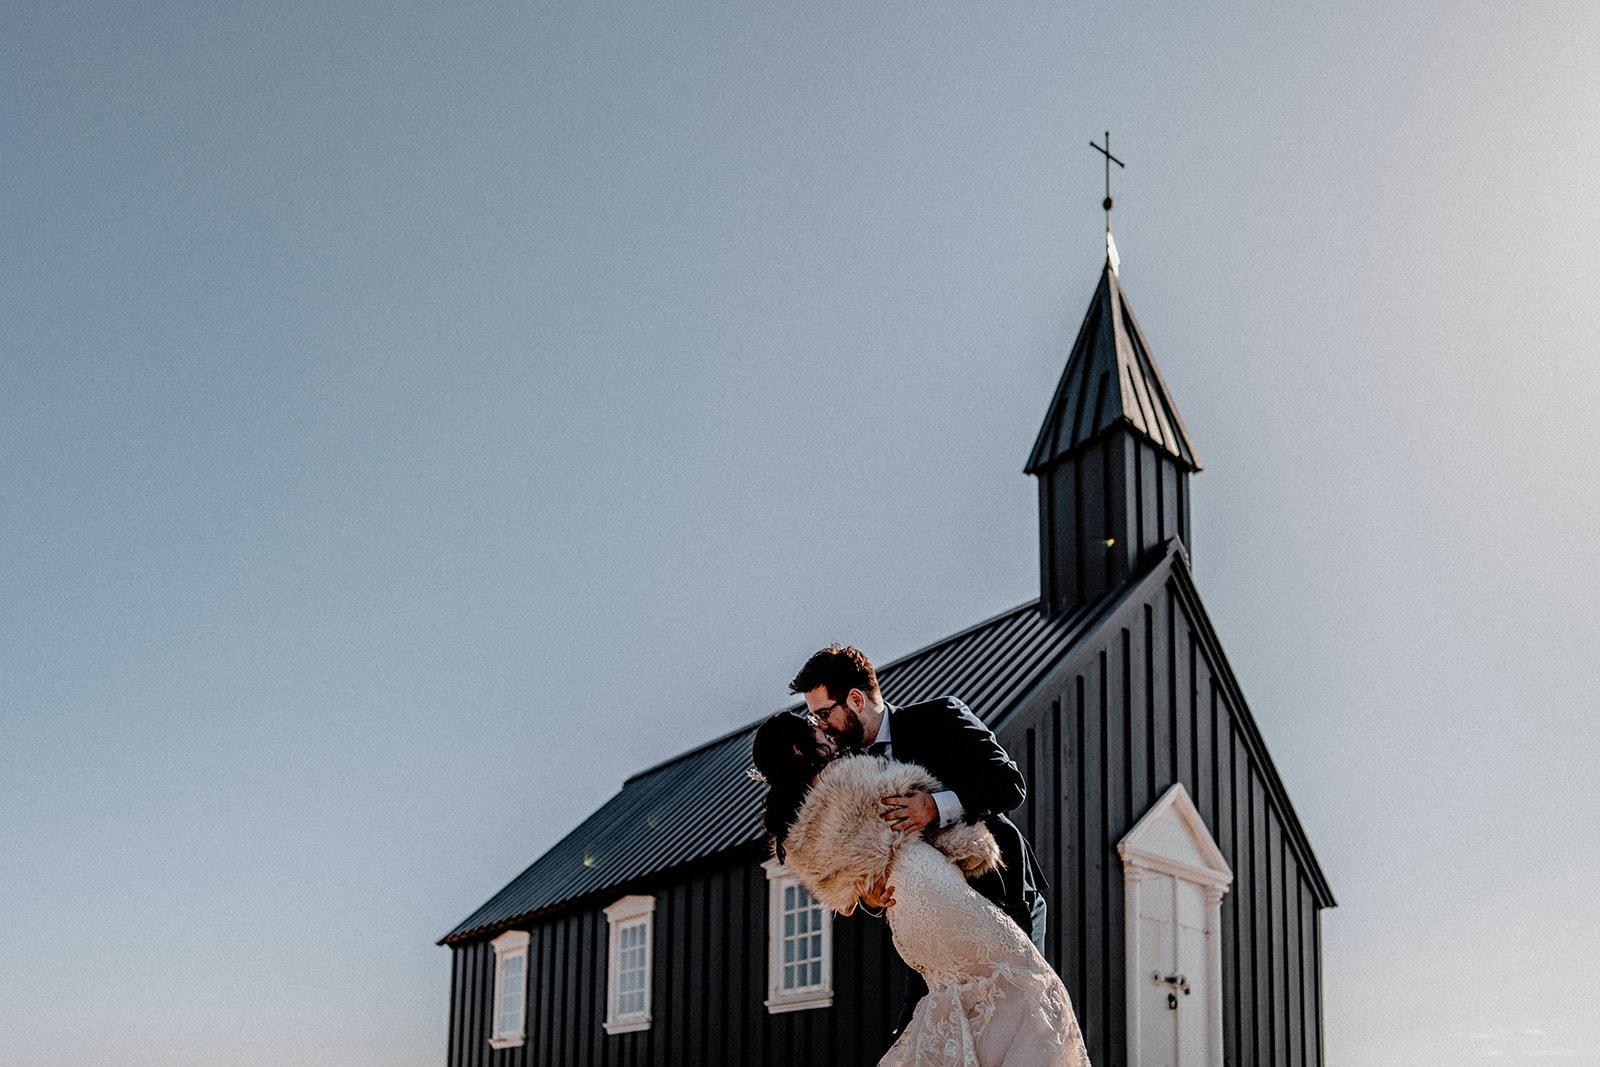 Captivating Western Iceland: Bride and Groom Amidst Majestic Scenery